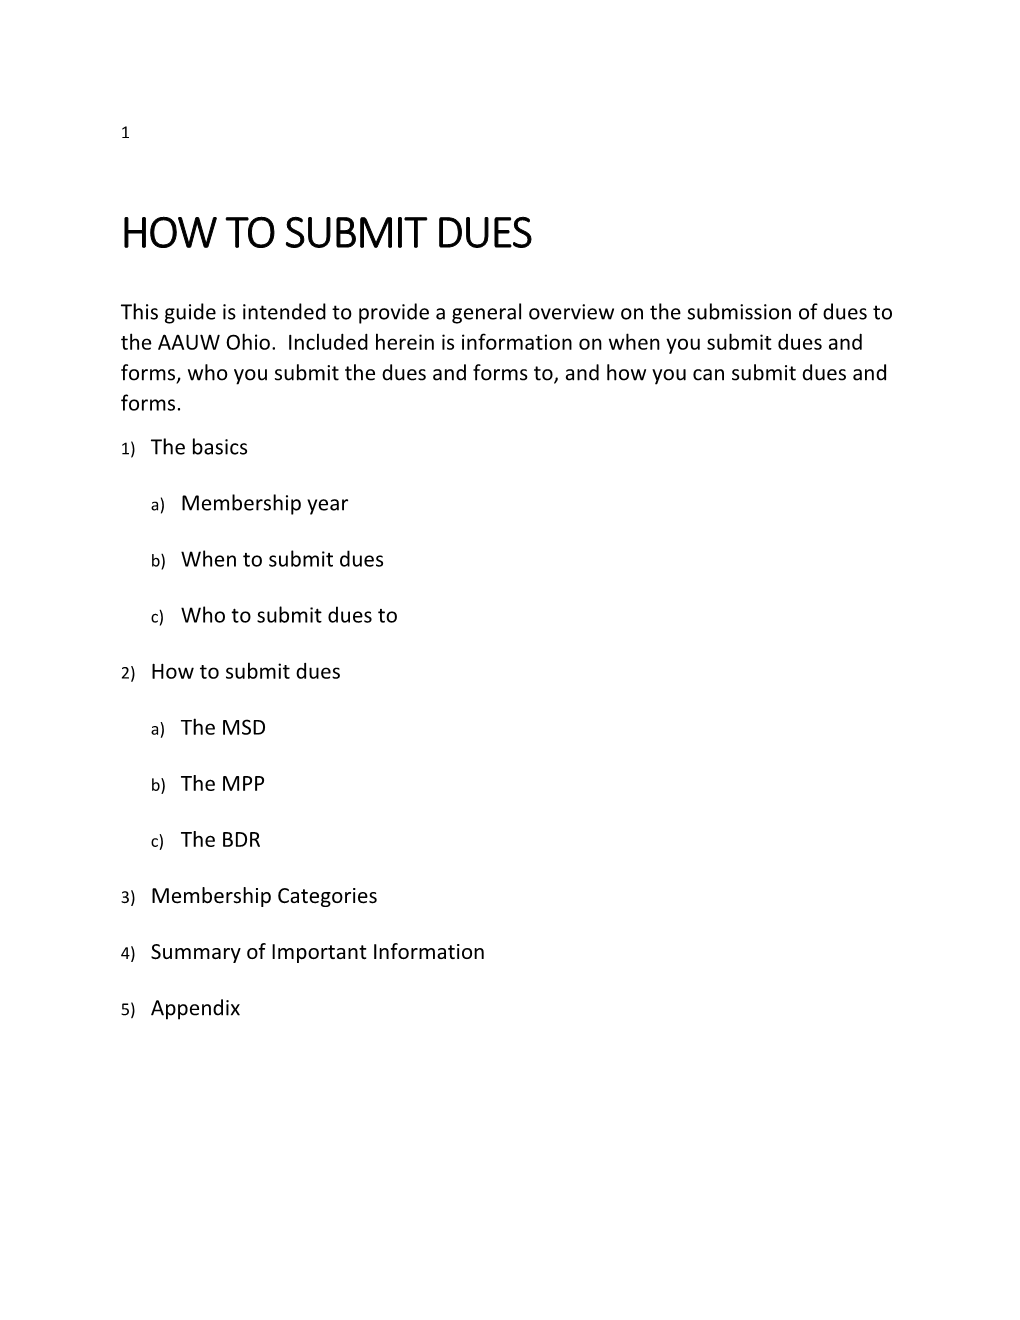 How to Submit Dues